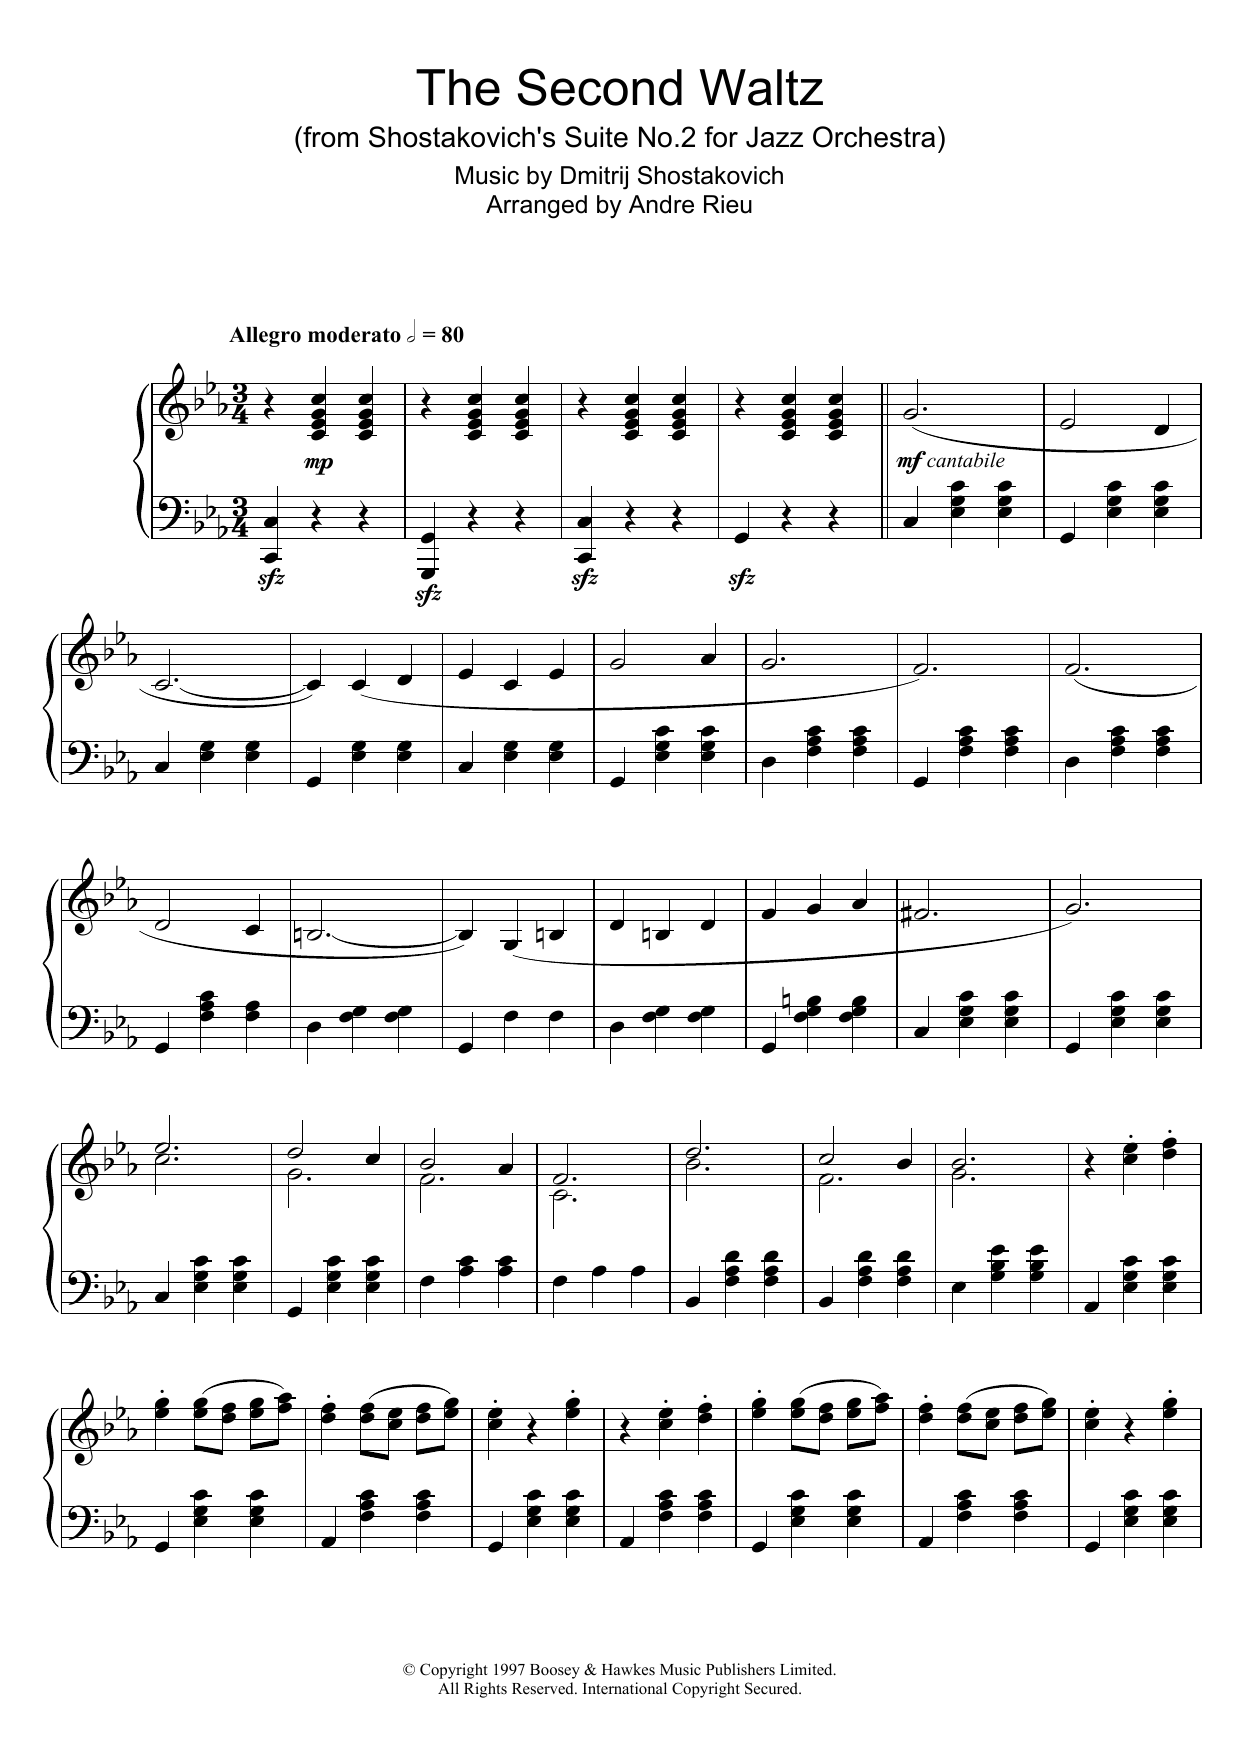 Andre Rieu The Second Waltz sheet music notes and chords. Download Printable PDF.